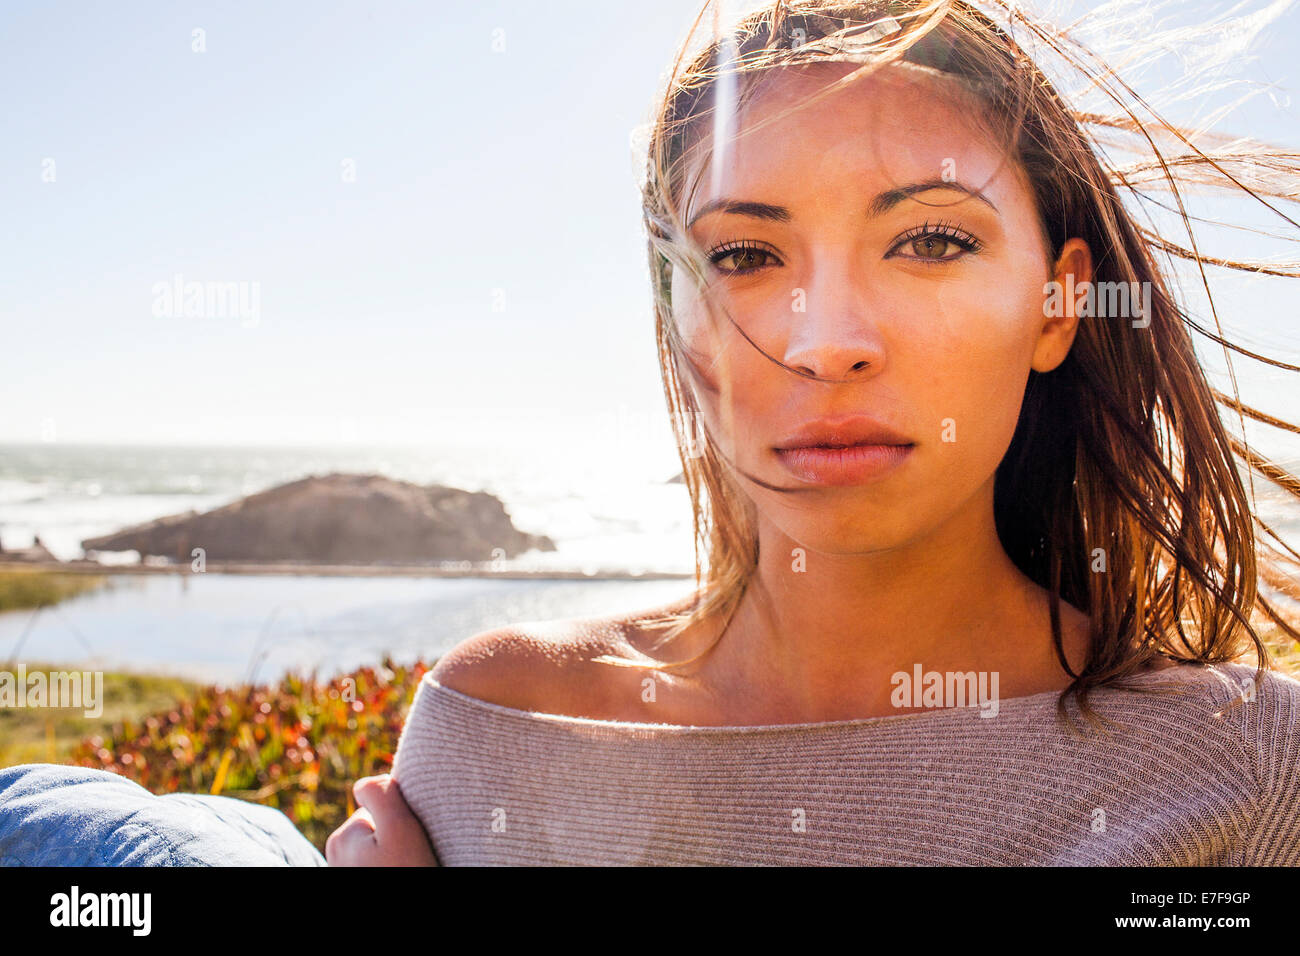 Mixed Race woman's hair blowing in wind sur colline Banque D'Images